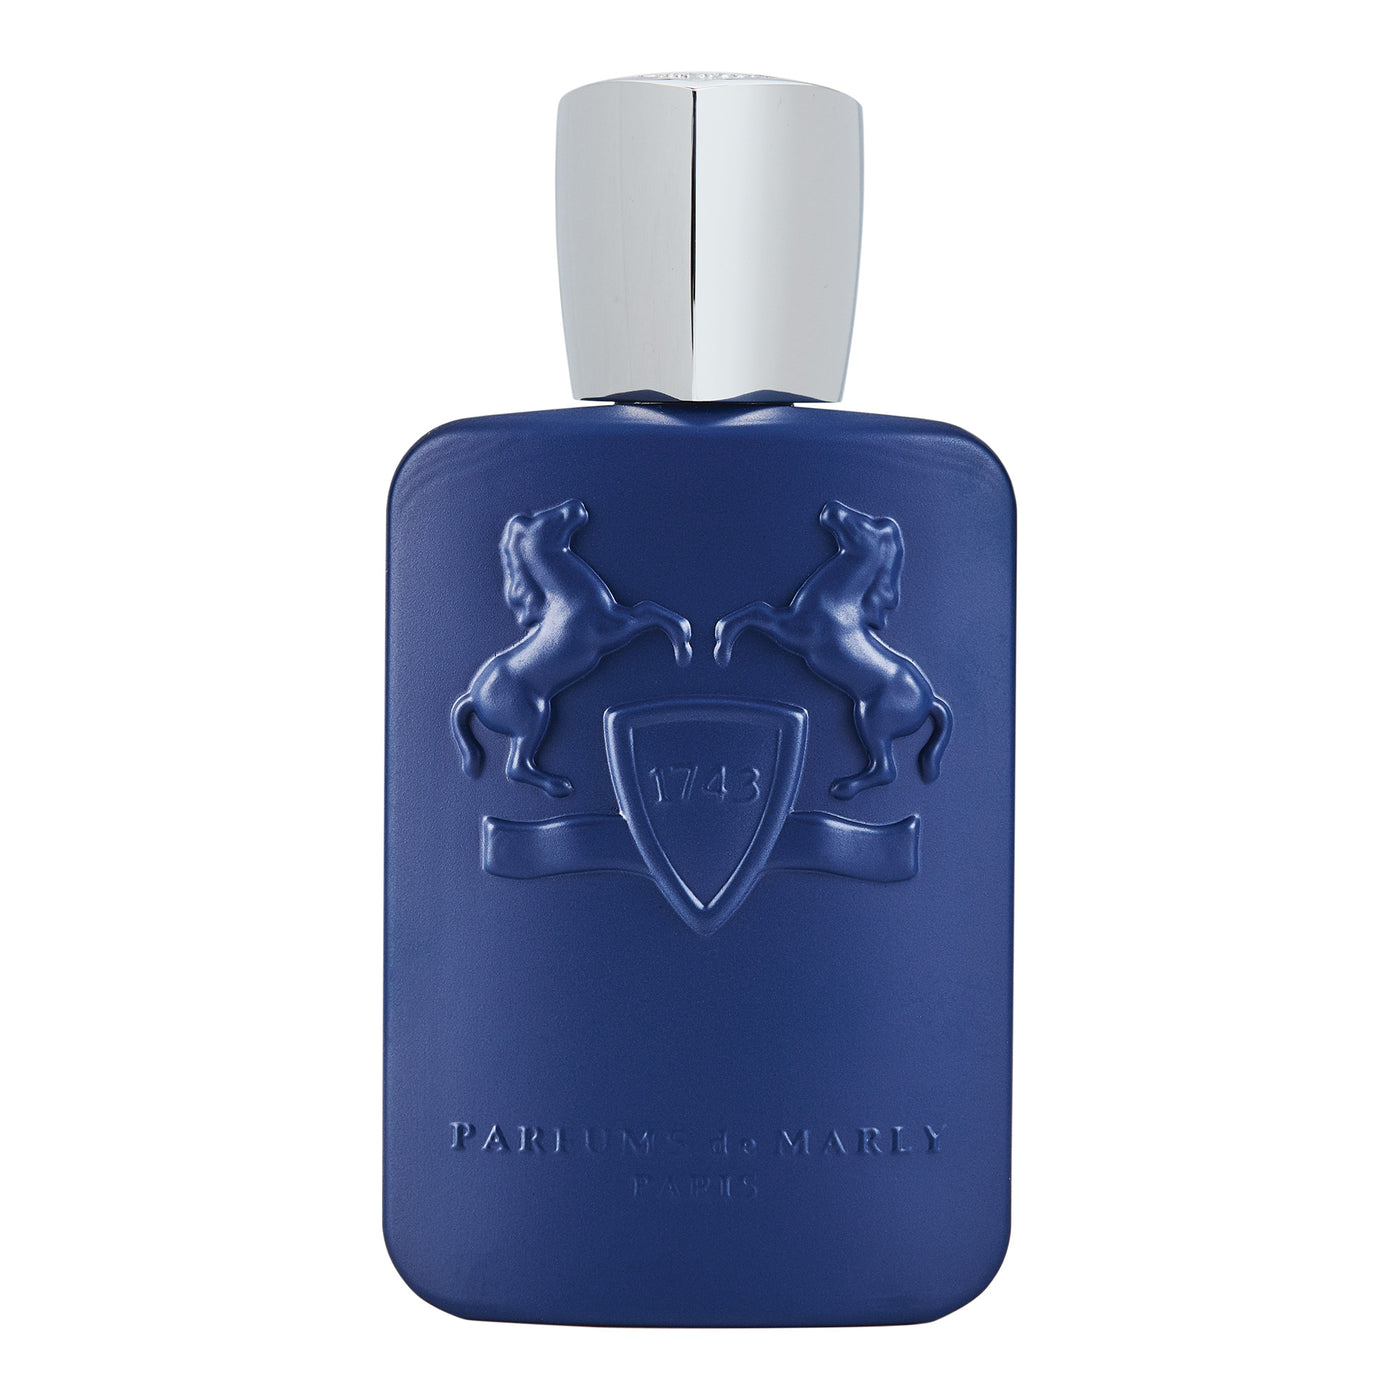 Parfums de Marly Percival - 125ml - Gharyal by Collectibles 